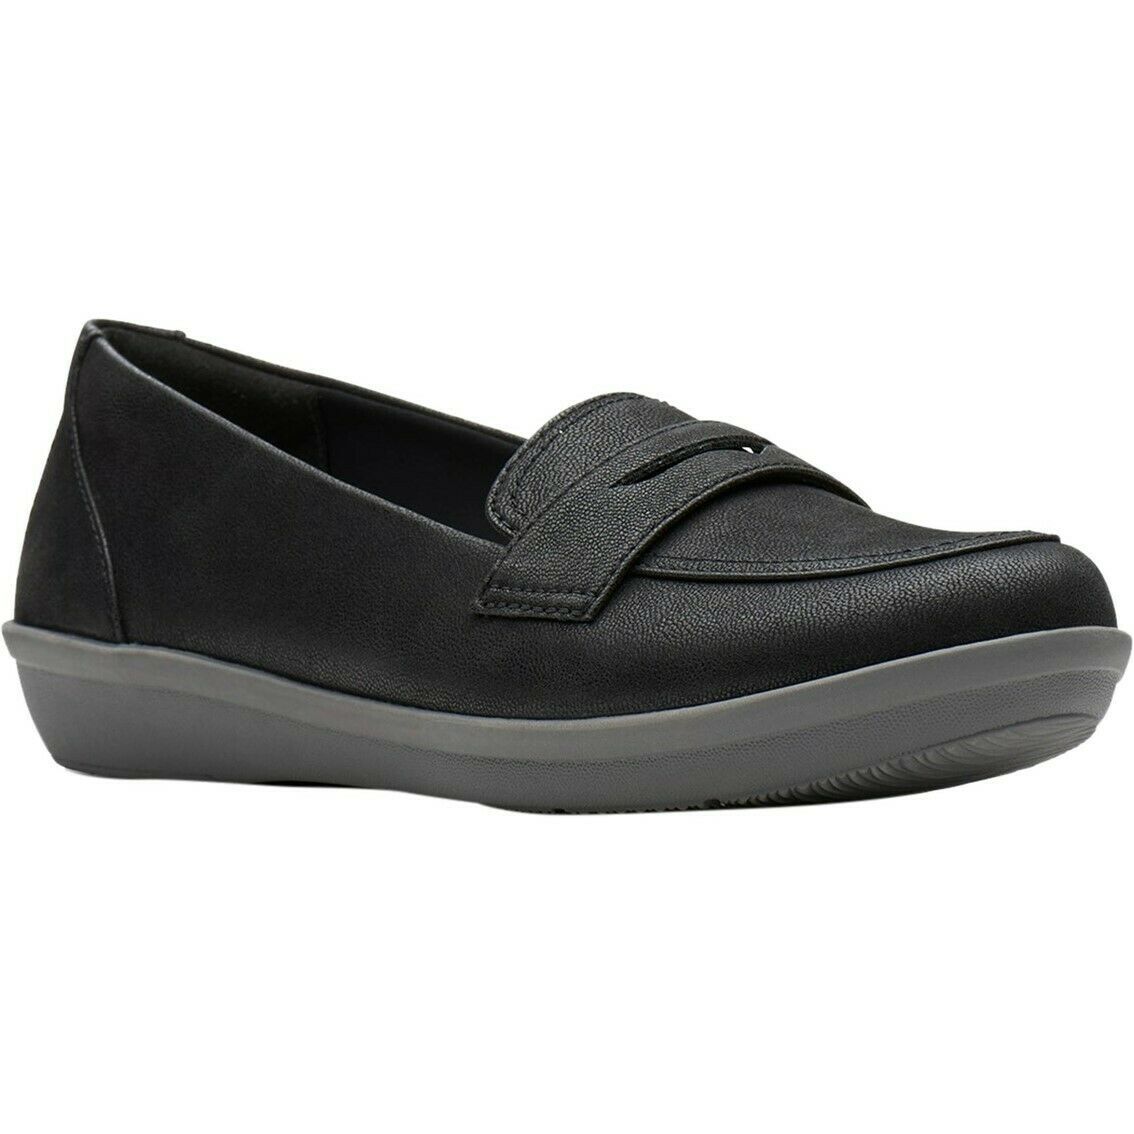 Clarks Loafer: 1 customer review and 